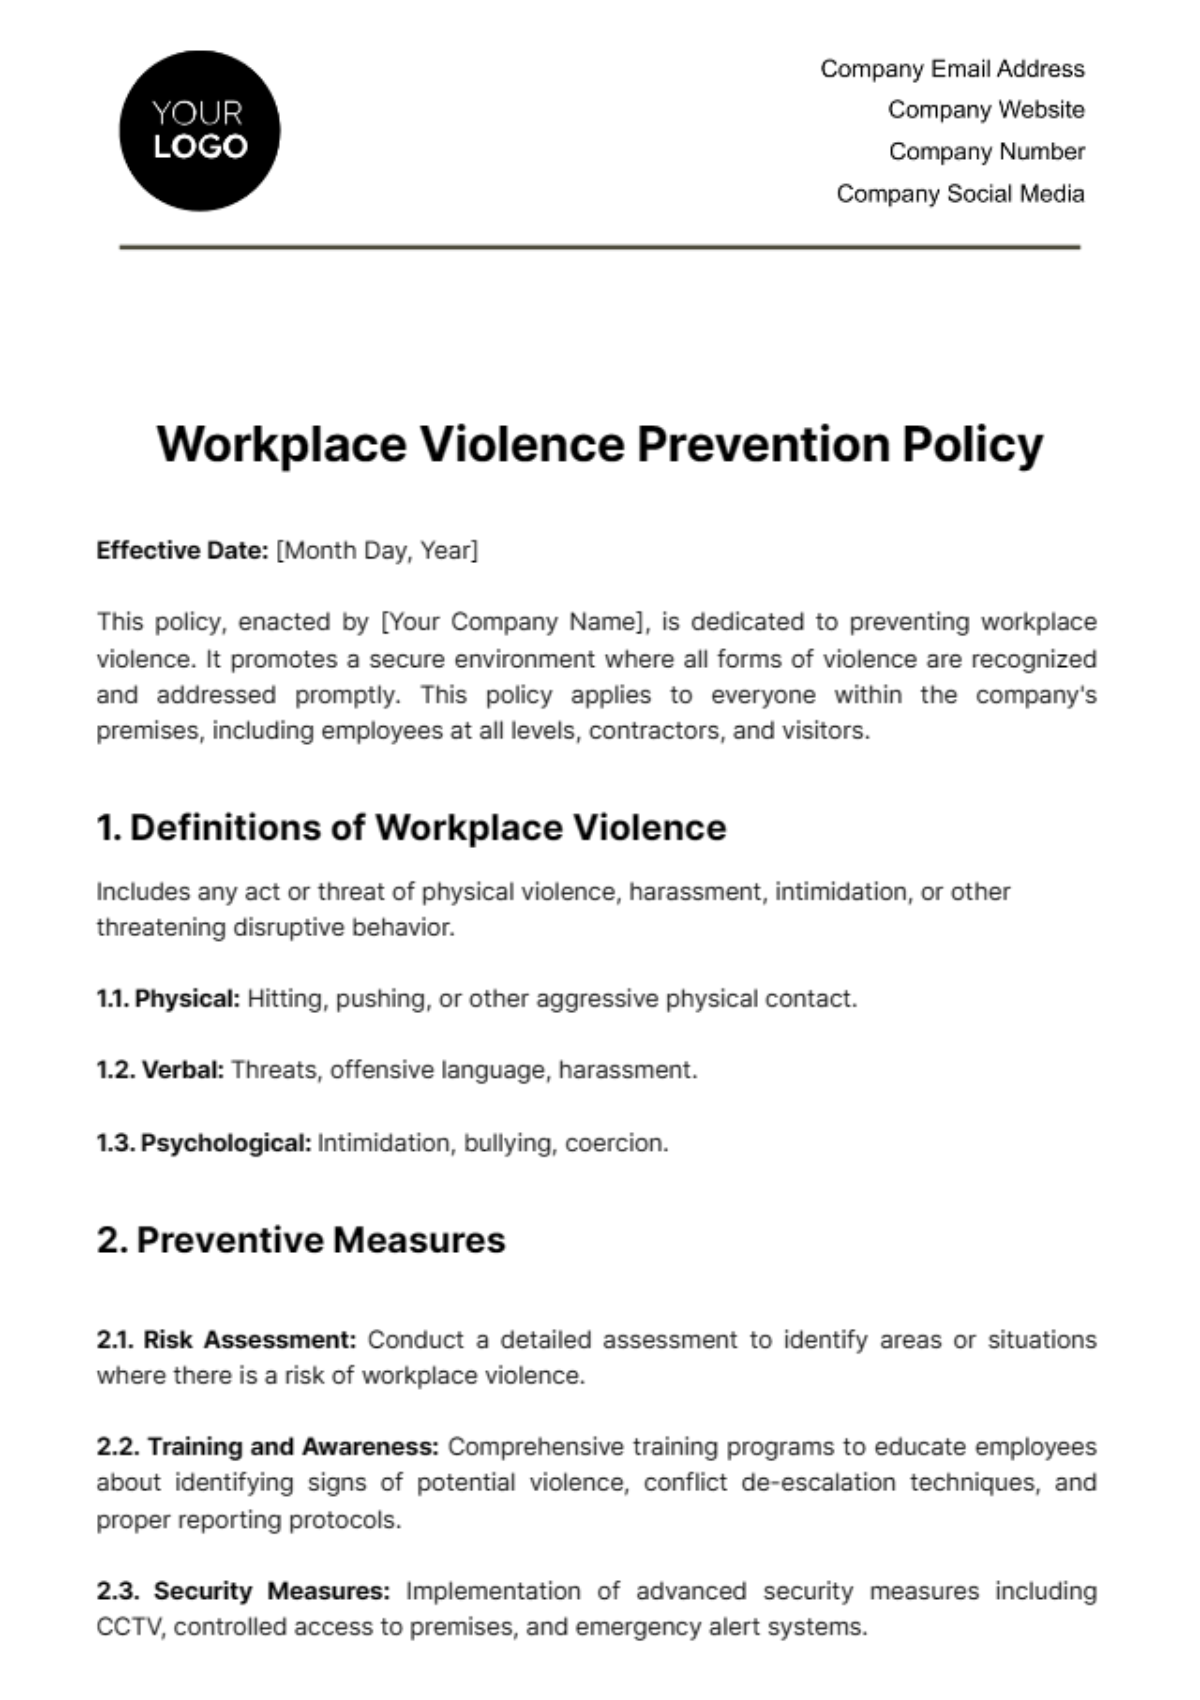 Free Workplace Violence Prevention Policy Template